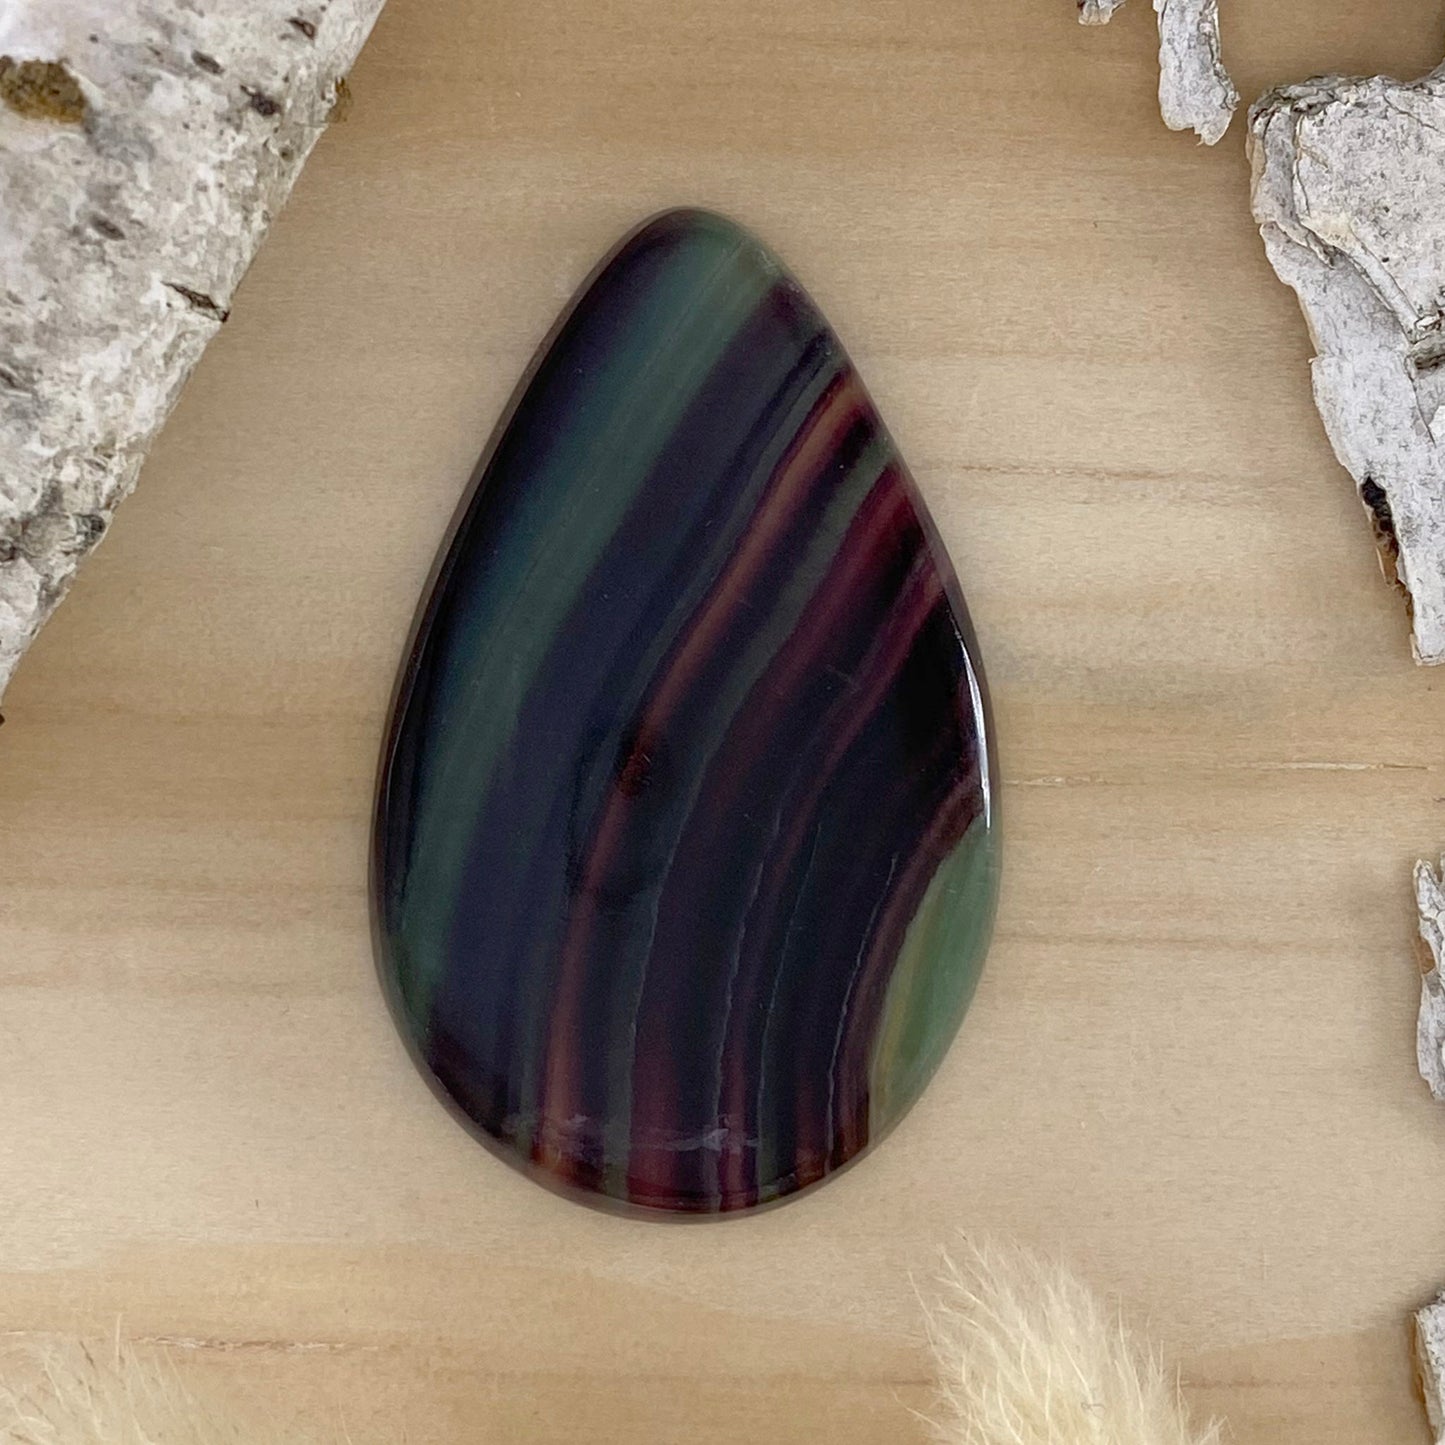 Rainbow Fluorite Cabochon Front View - Stone Treasures by the Lake